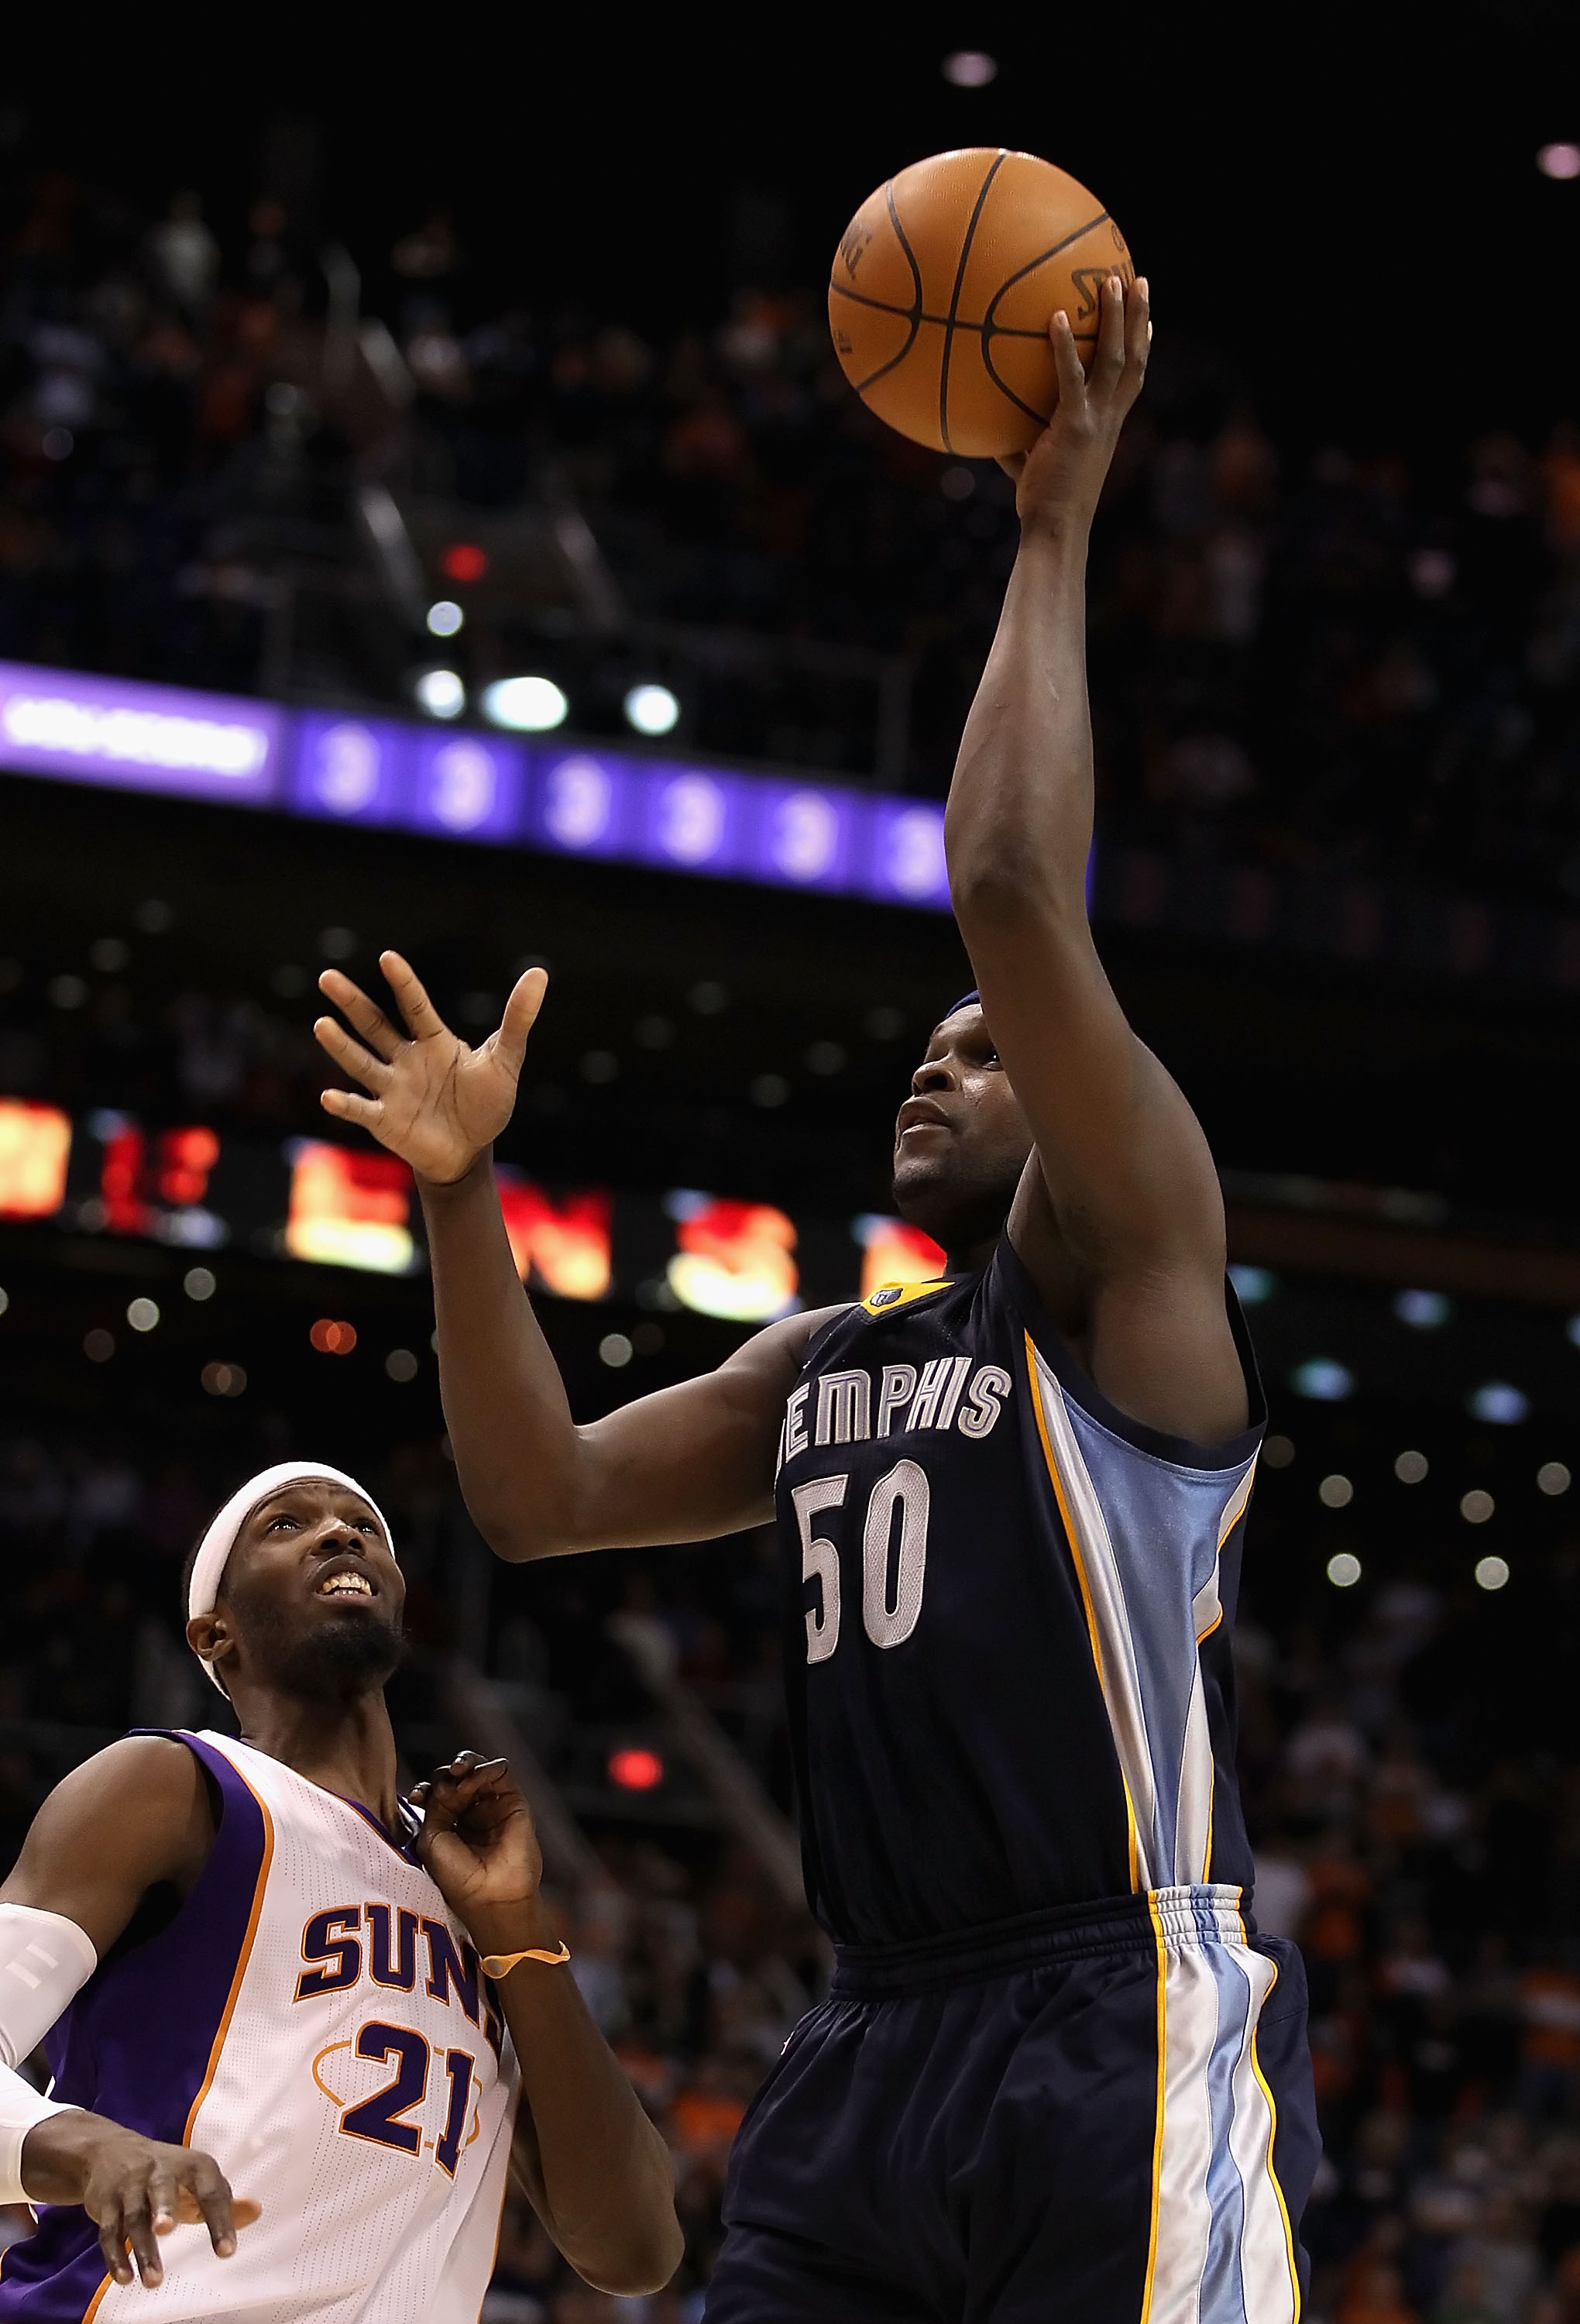 PHOENIX - DECEMBER 08:  Zach Randolph #50 of the Memphis Grizzlies puts up a shot against the Phoenix Suns during the NBA game at US Airways Center on December 8, 2010 in Phoenix, Arizona. NOTE TO USER: User expressly acknowledges and agrees that, by down